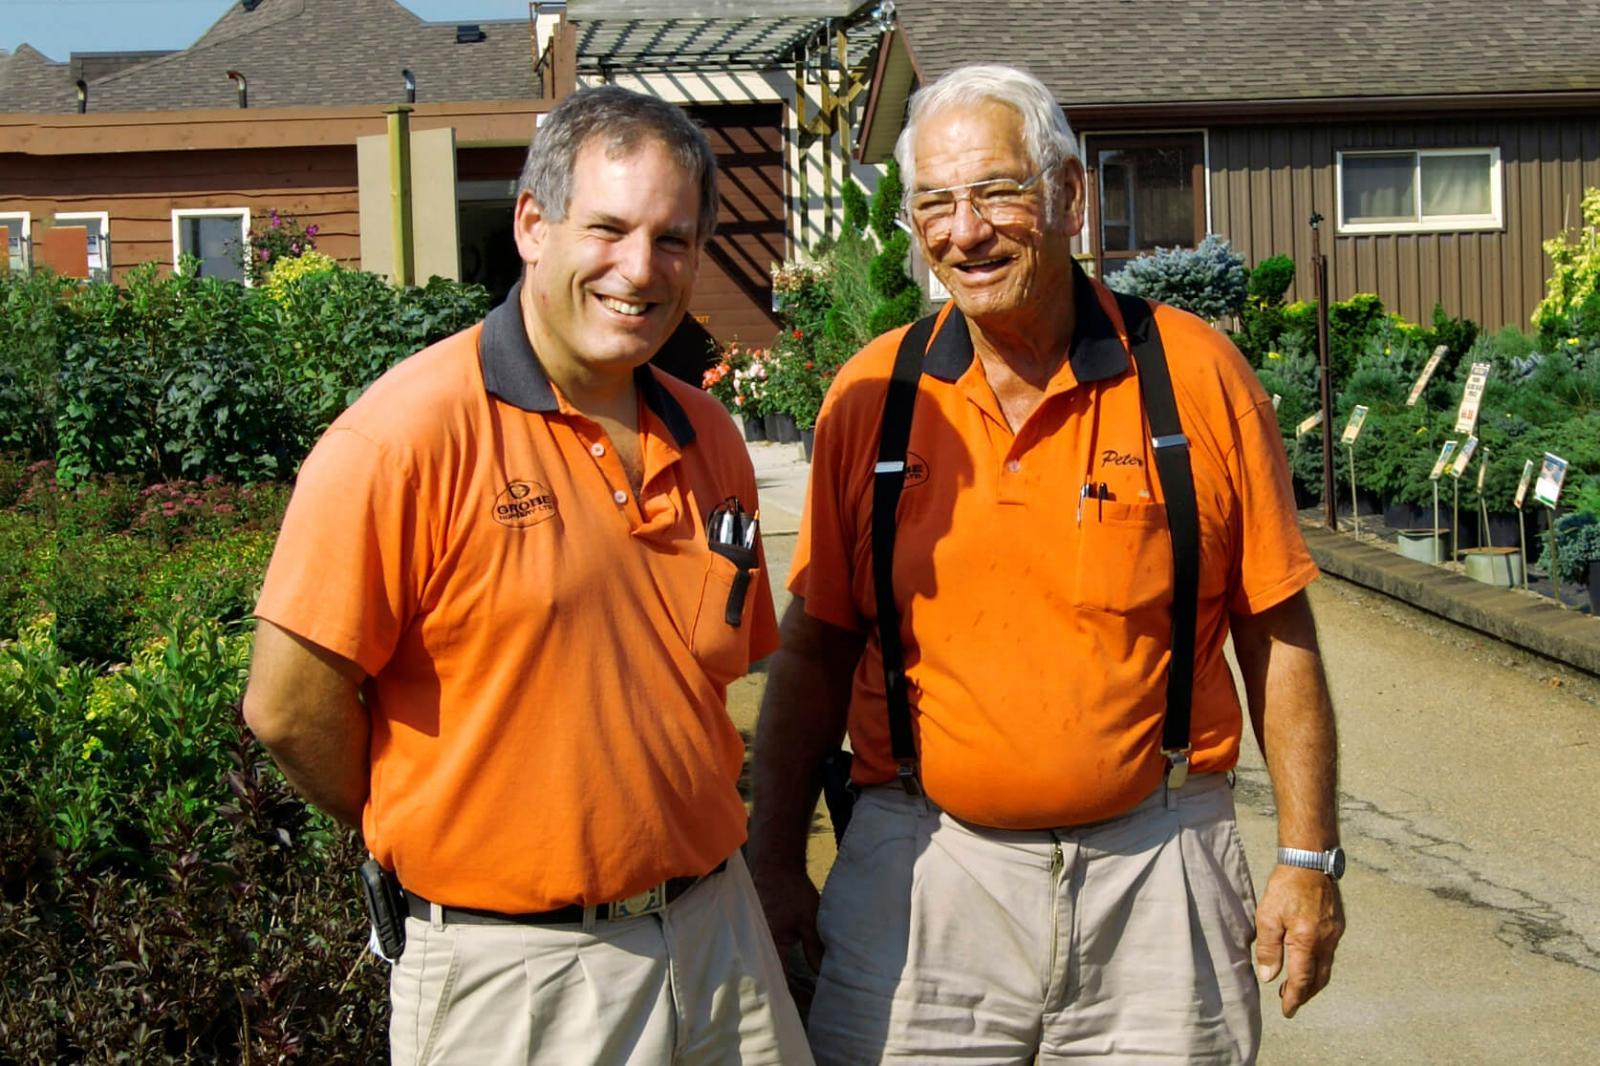 Son and father, Perry and Peter Grobe, are proud of their business’s growth over the past 50 years.